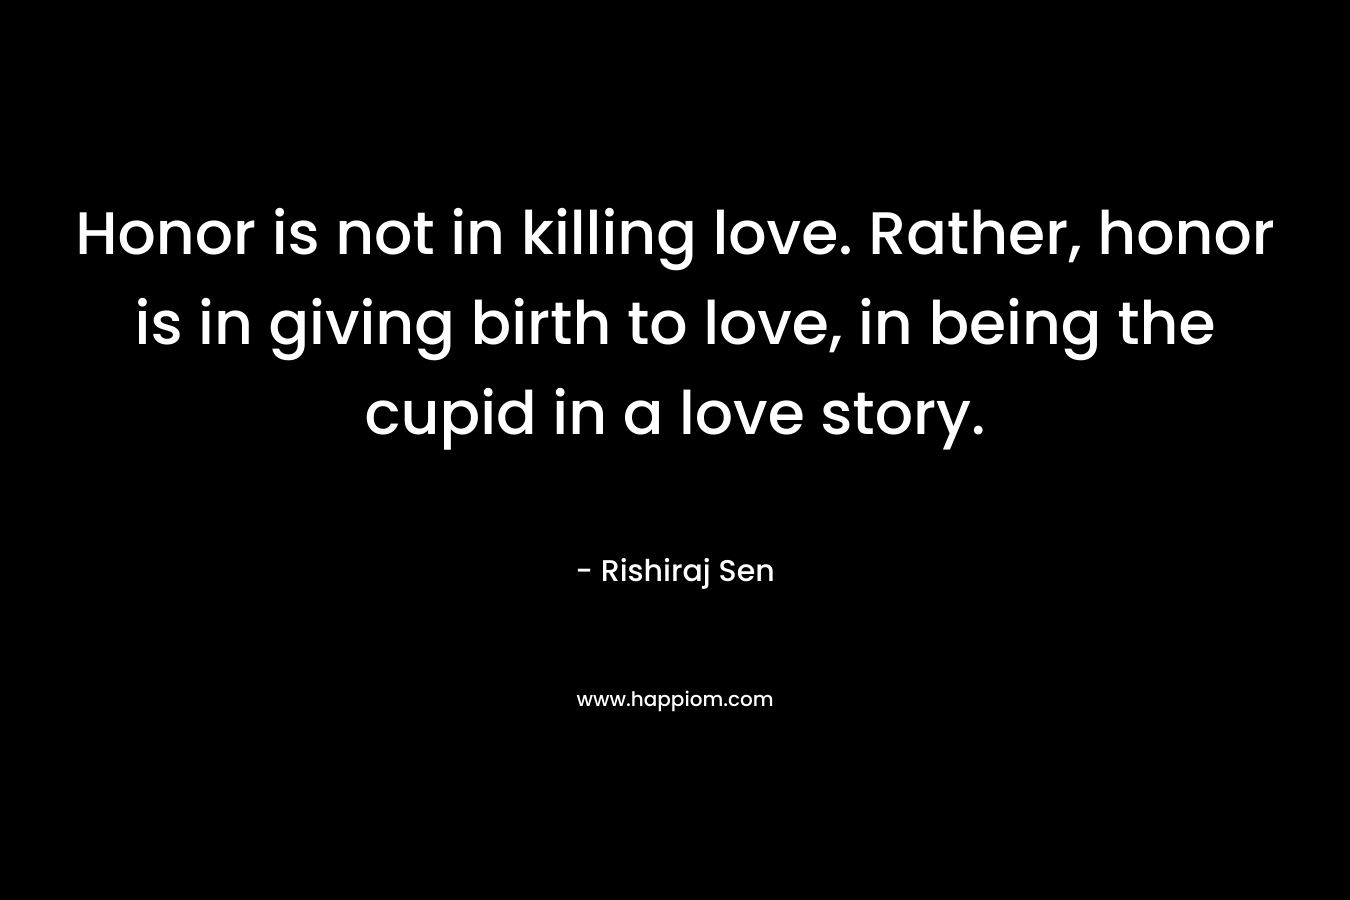 Honor is not in killing love. Rather, honor is in giving birth to love, in being the cupid in a love story. – Rishiraj Sen